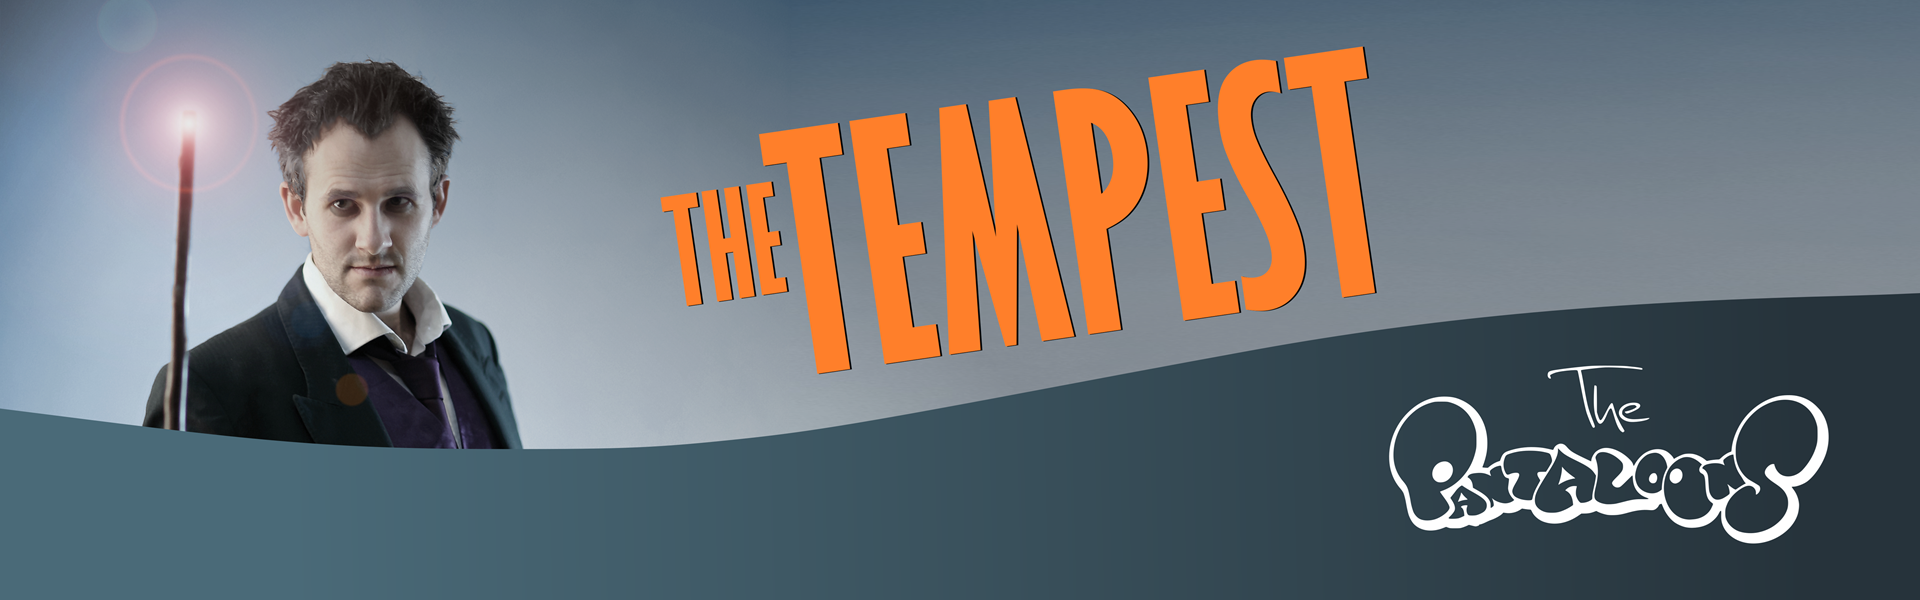 Outdoor Theatre - The Tempest